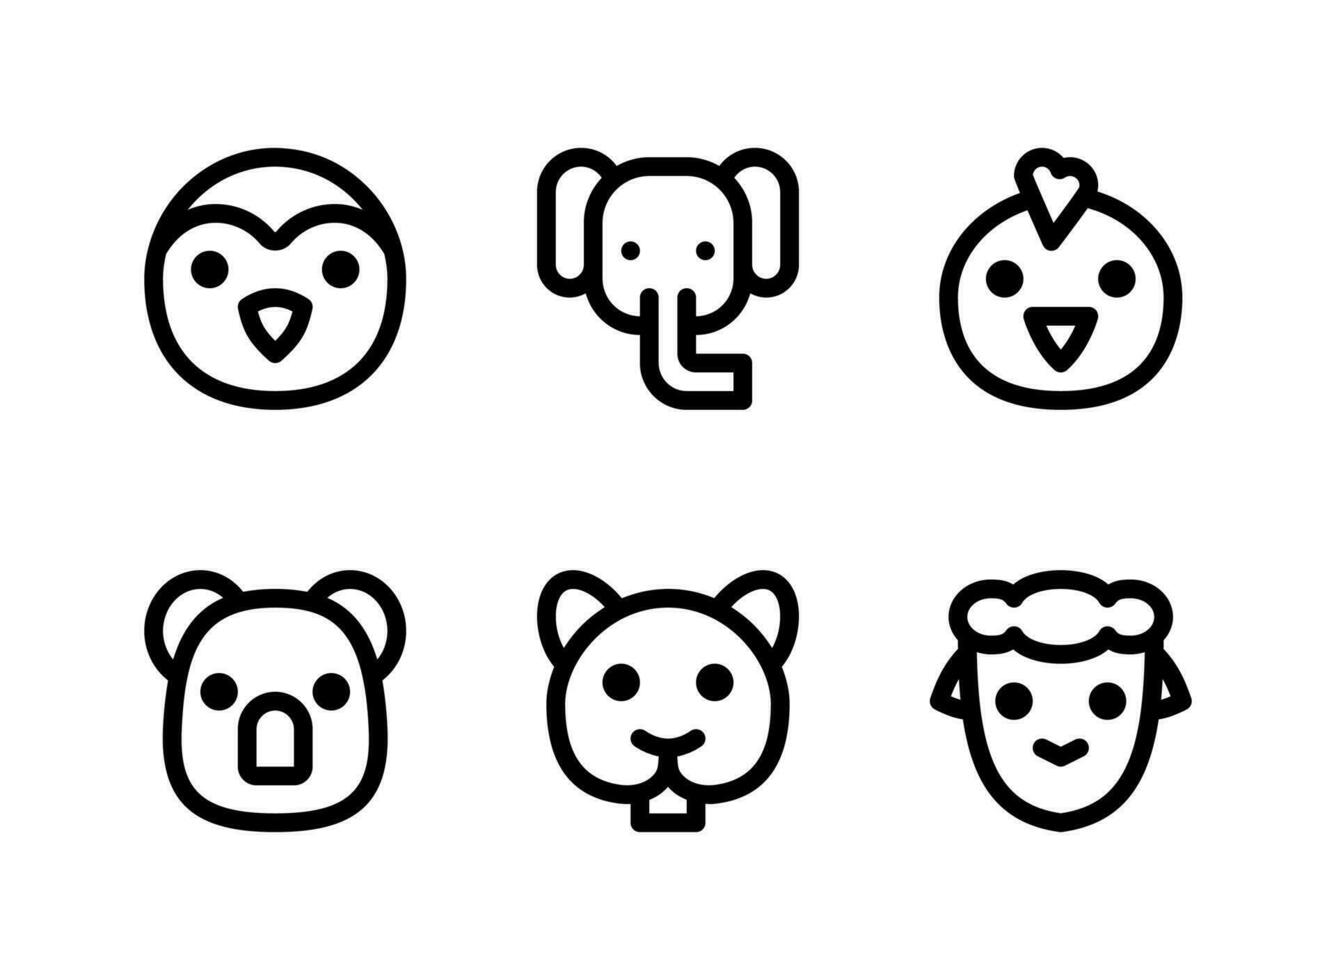 Simple Set of Animal Related Vector Line Icons. Contains Icons as Penguin, Elephant, Chick, Koala and more.